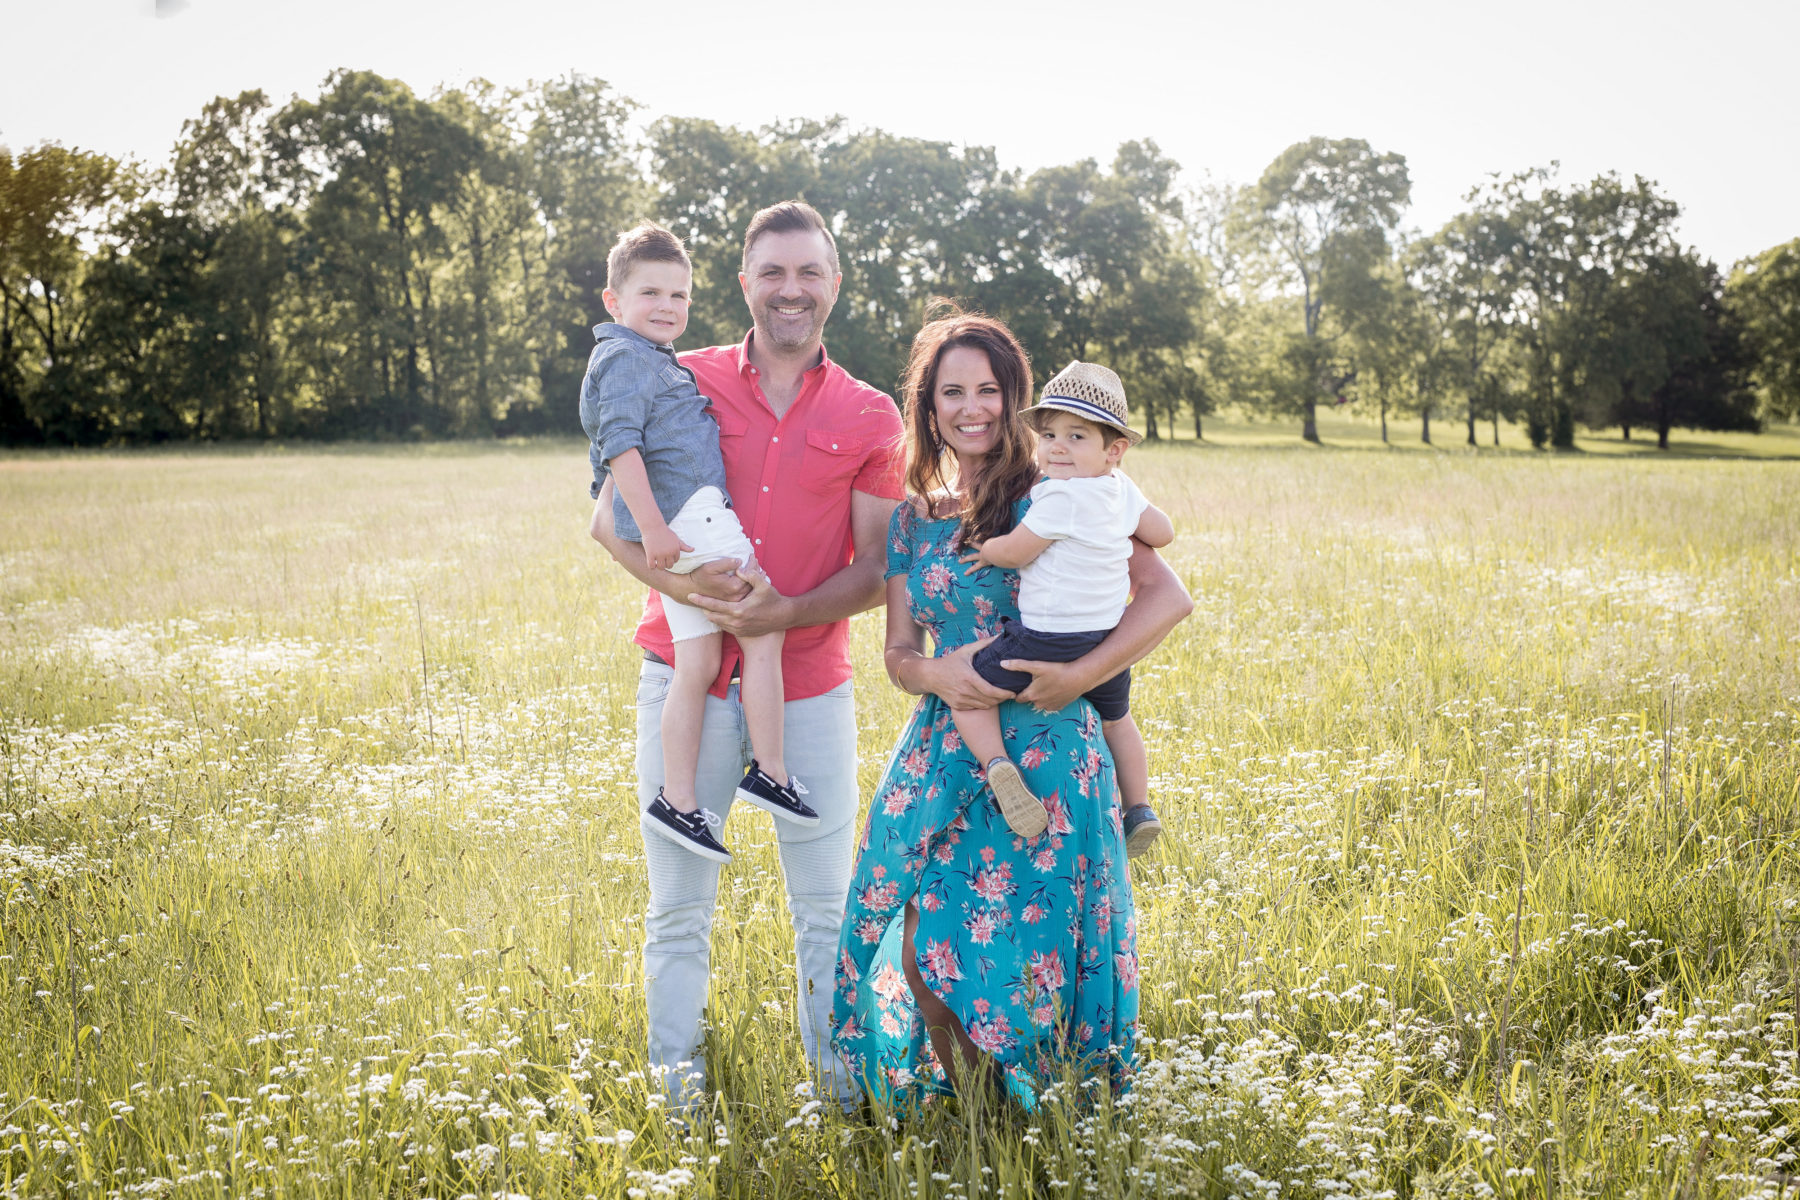 Mini Family Photo Session by Becka Edmonson Photography featured on Nashville Bride Guide!